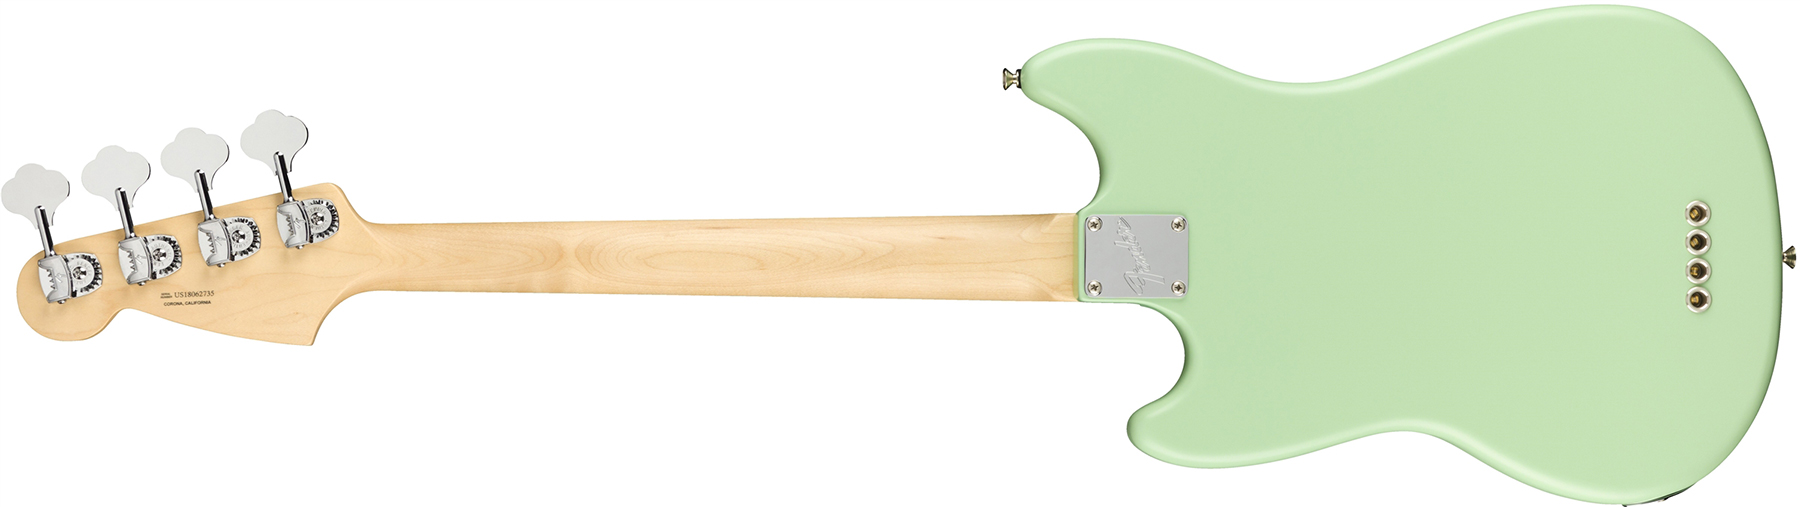 Fender Mustang Bass American Performer Usa Rw - Satin Surf Green - Electric bass for kids - Variation 1